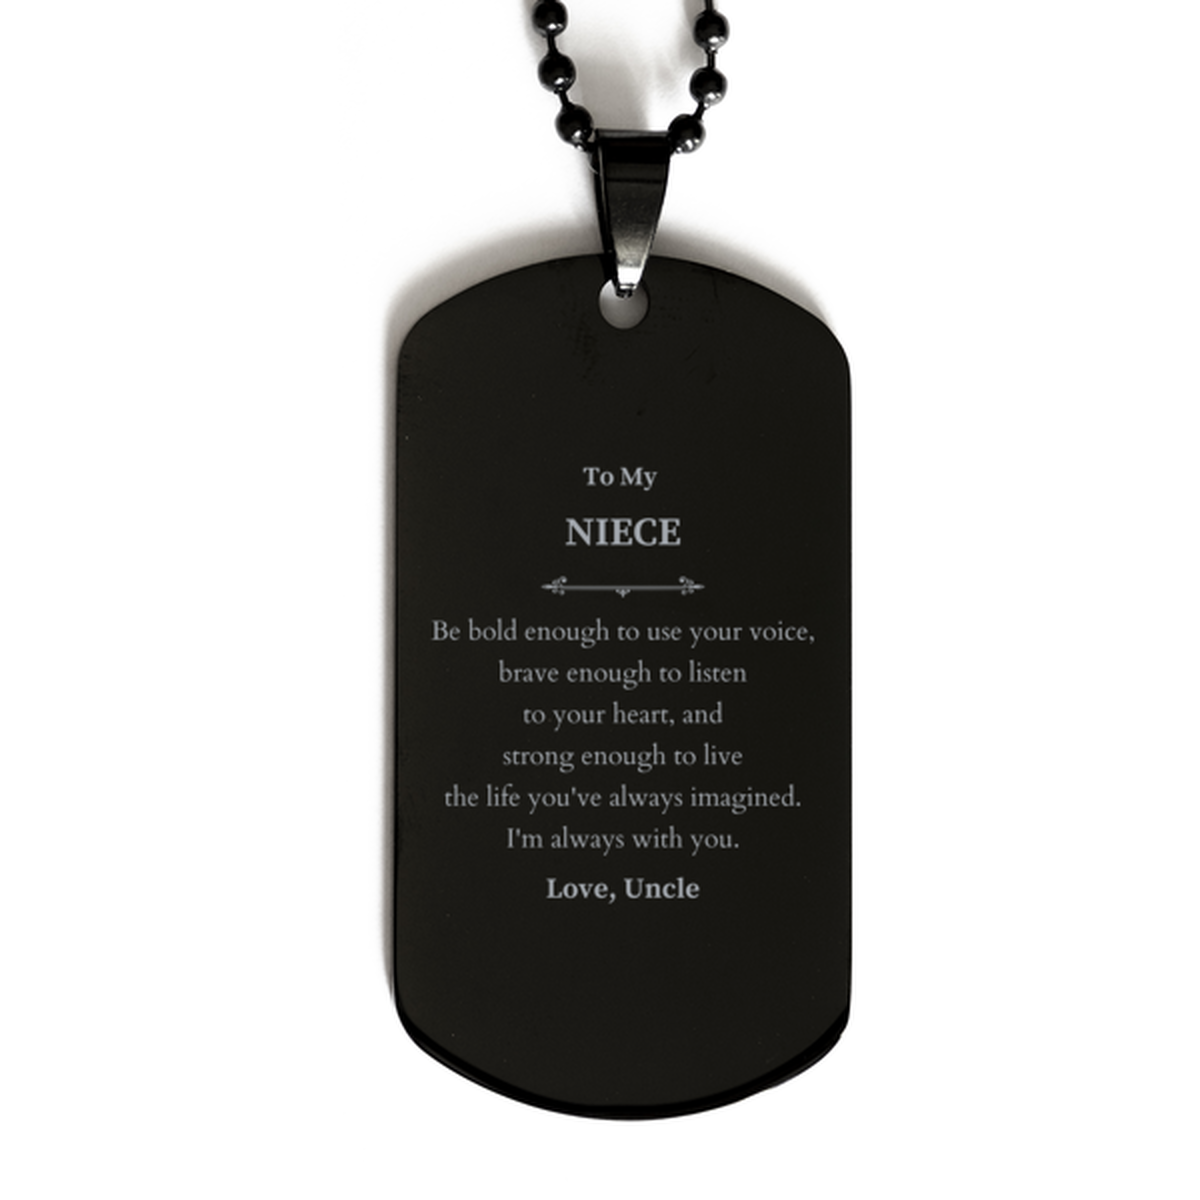 Keepsake Niece Black Dog Tag Gift Idea Graduation Christmas Birthday Niece from Uncle, Niece Be bold enough to use your voice, brave enough to listen to your heart. Love, Uncle